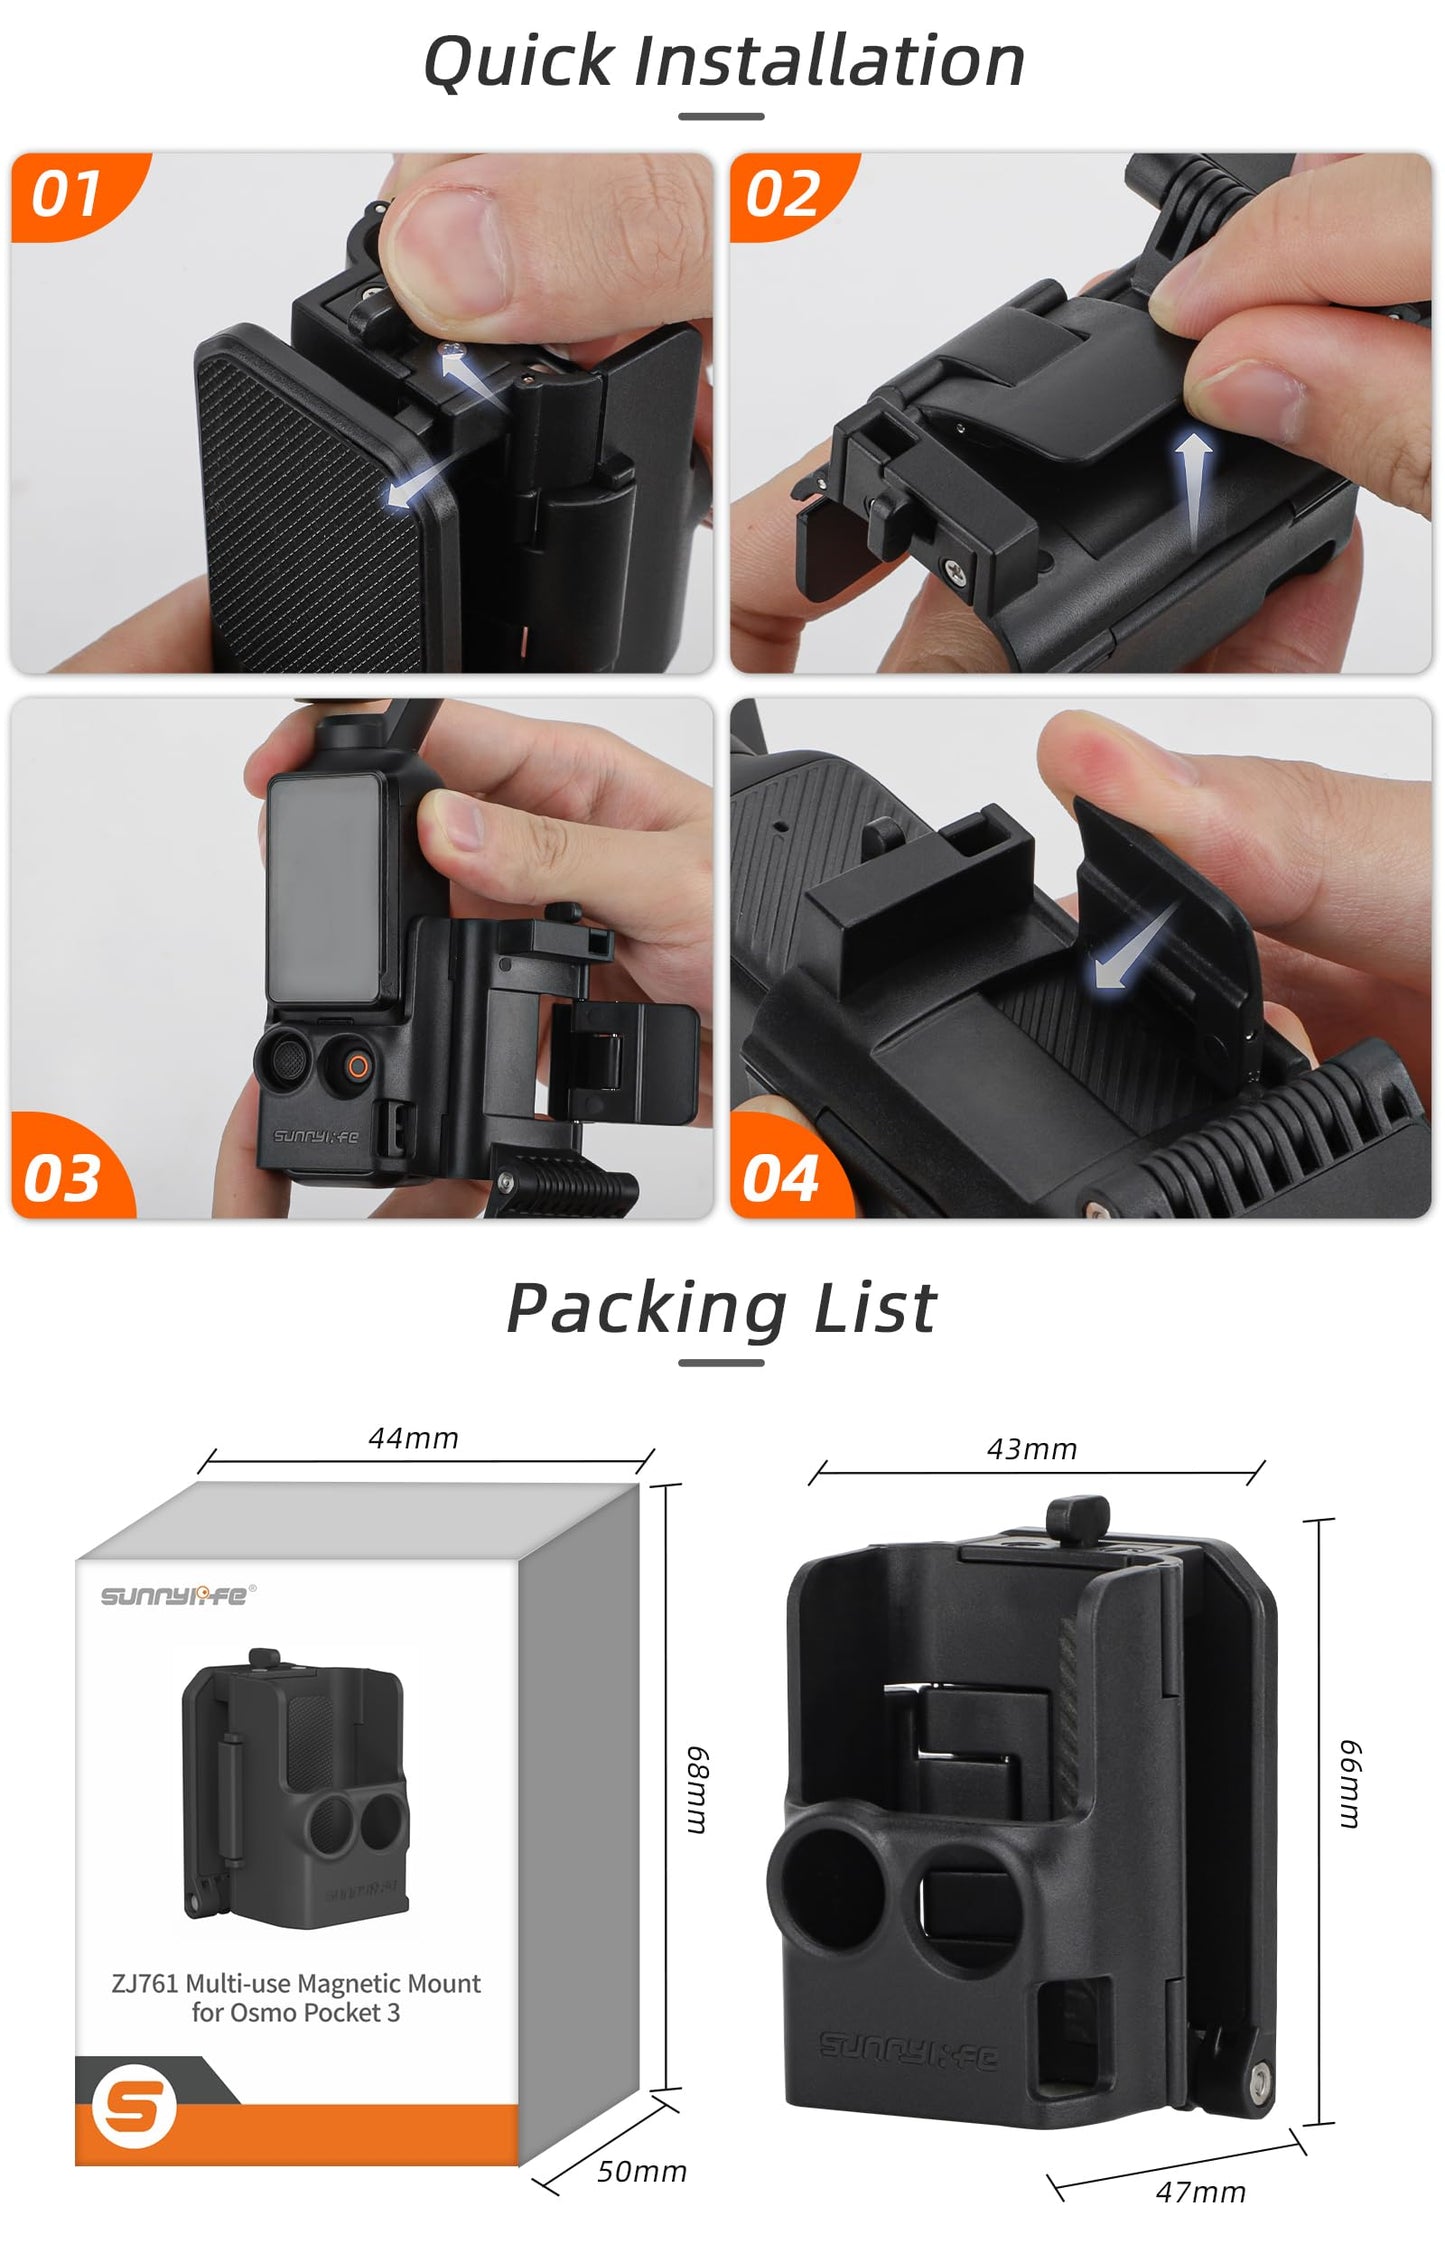 LIBOQIAO Multifuctional Magnetic Bracket Mount Compatible with DJI OSMO Pocket 3 Expansion Adapter Magnet Steering Holder Bracket,DJI OSMO Pocket 3 Accessories